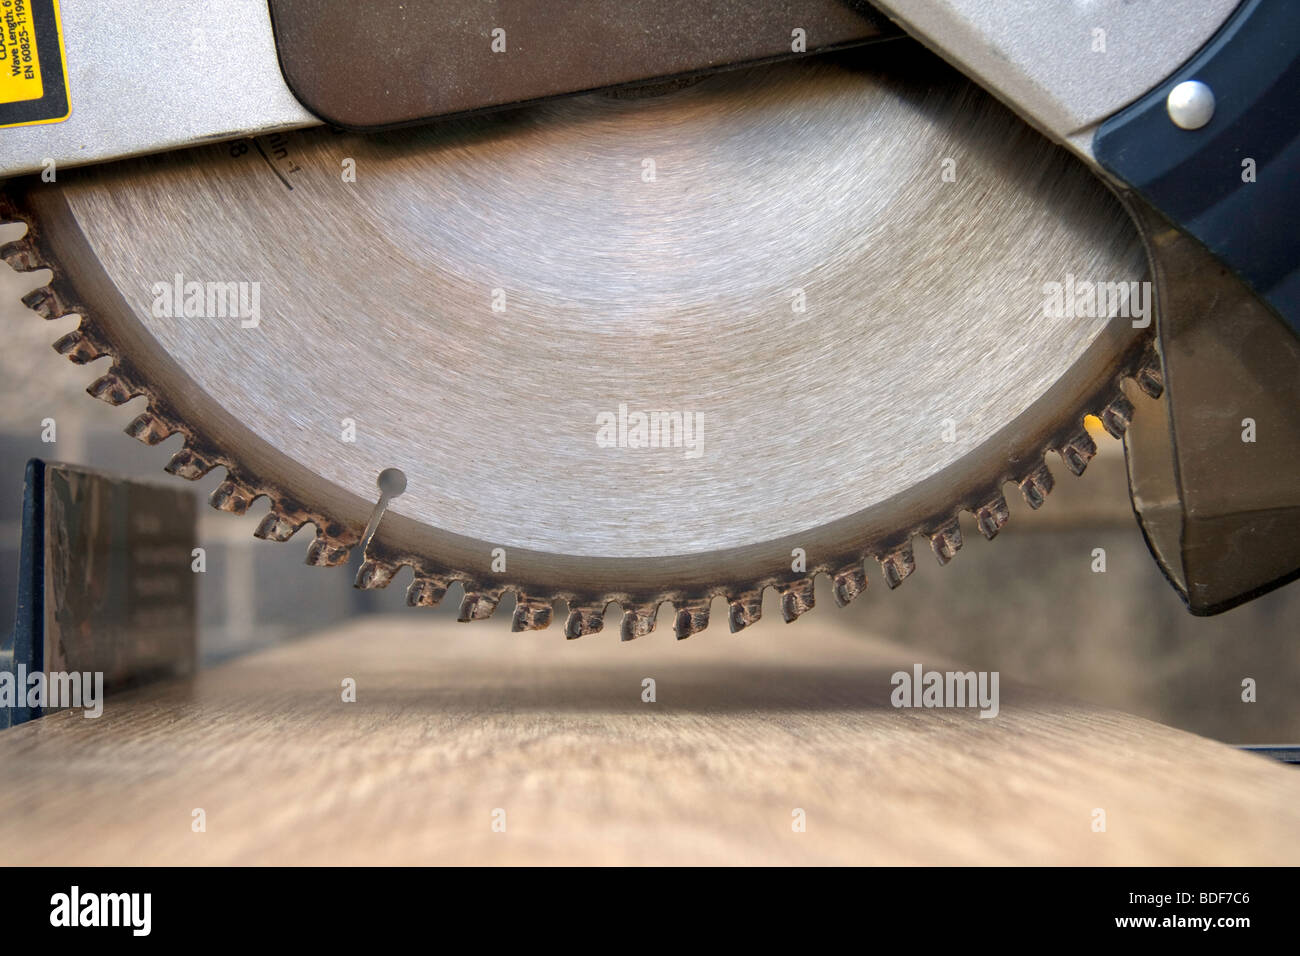 A view of a circular saw blade about to cut a piece of wood Stock Photo